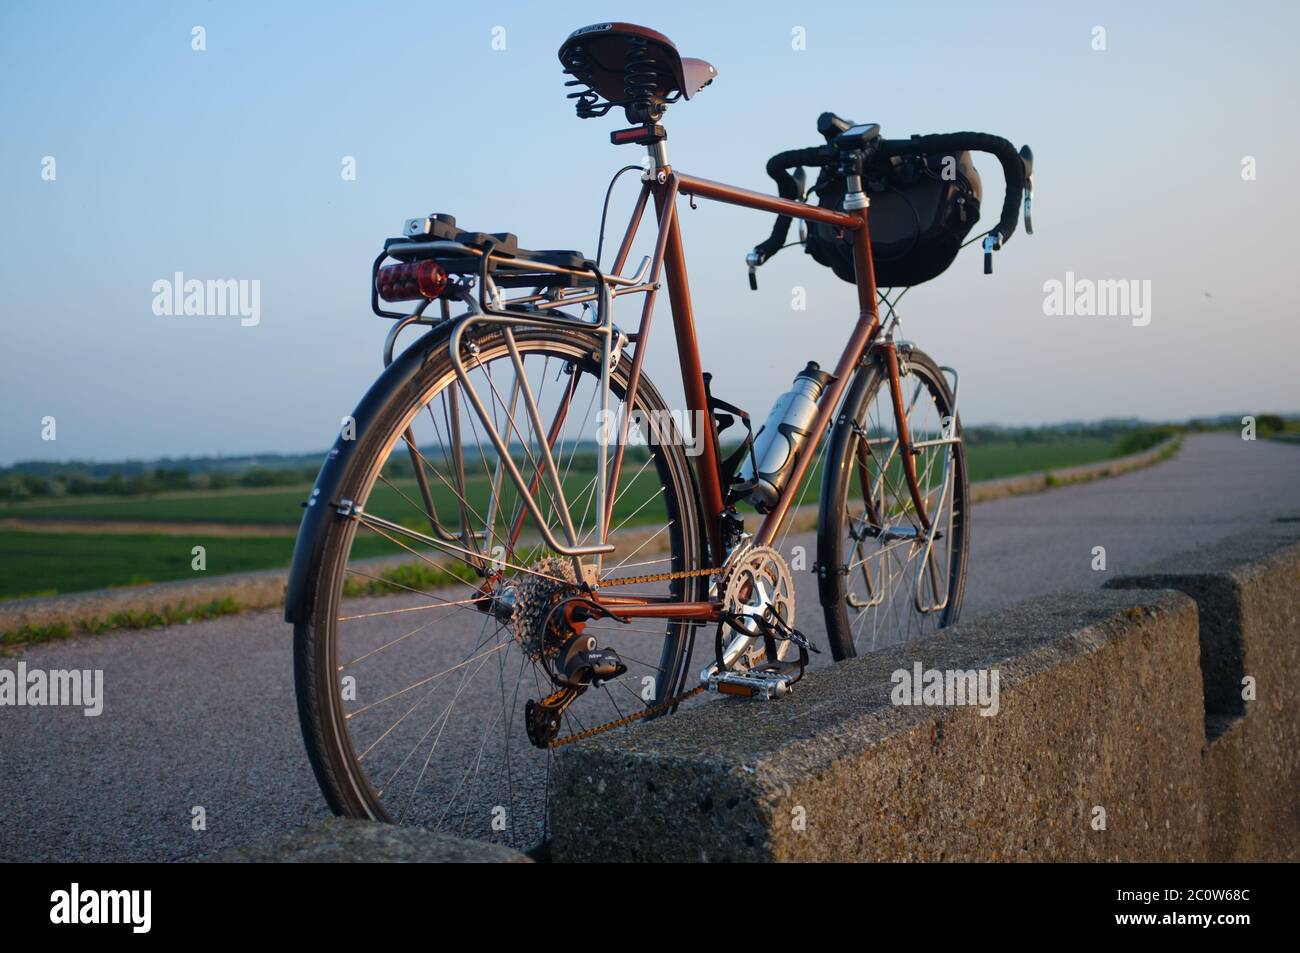 A racing bicycle on a coastal route. Stock Photo